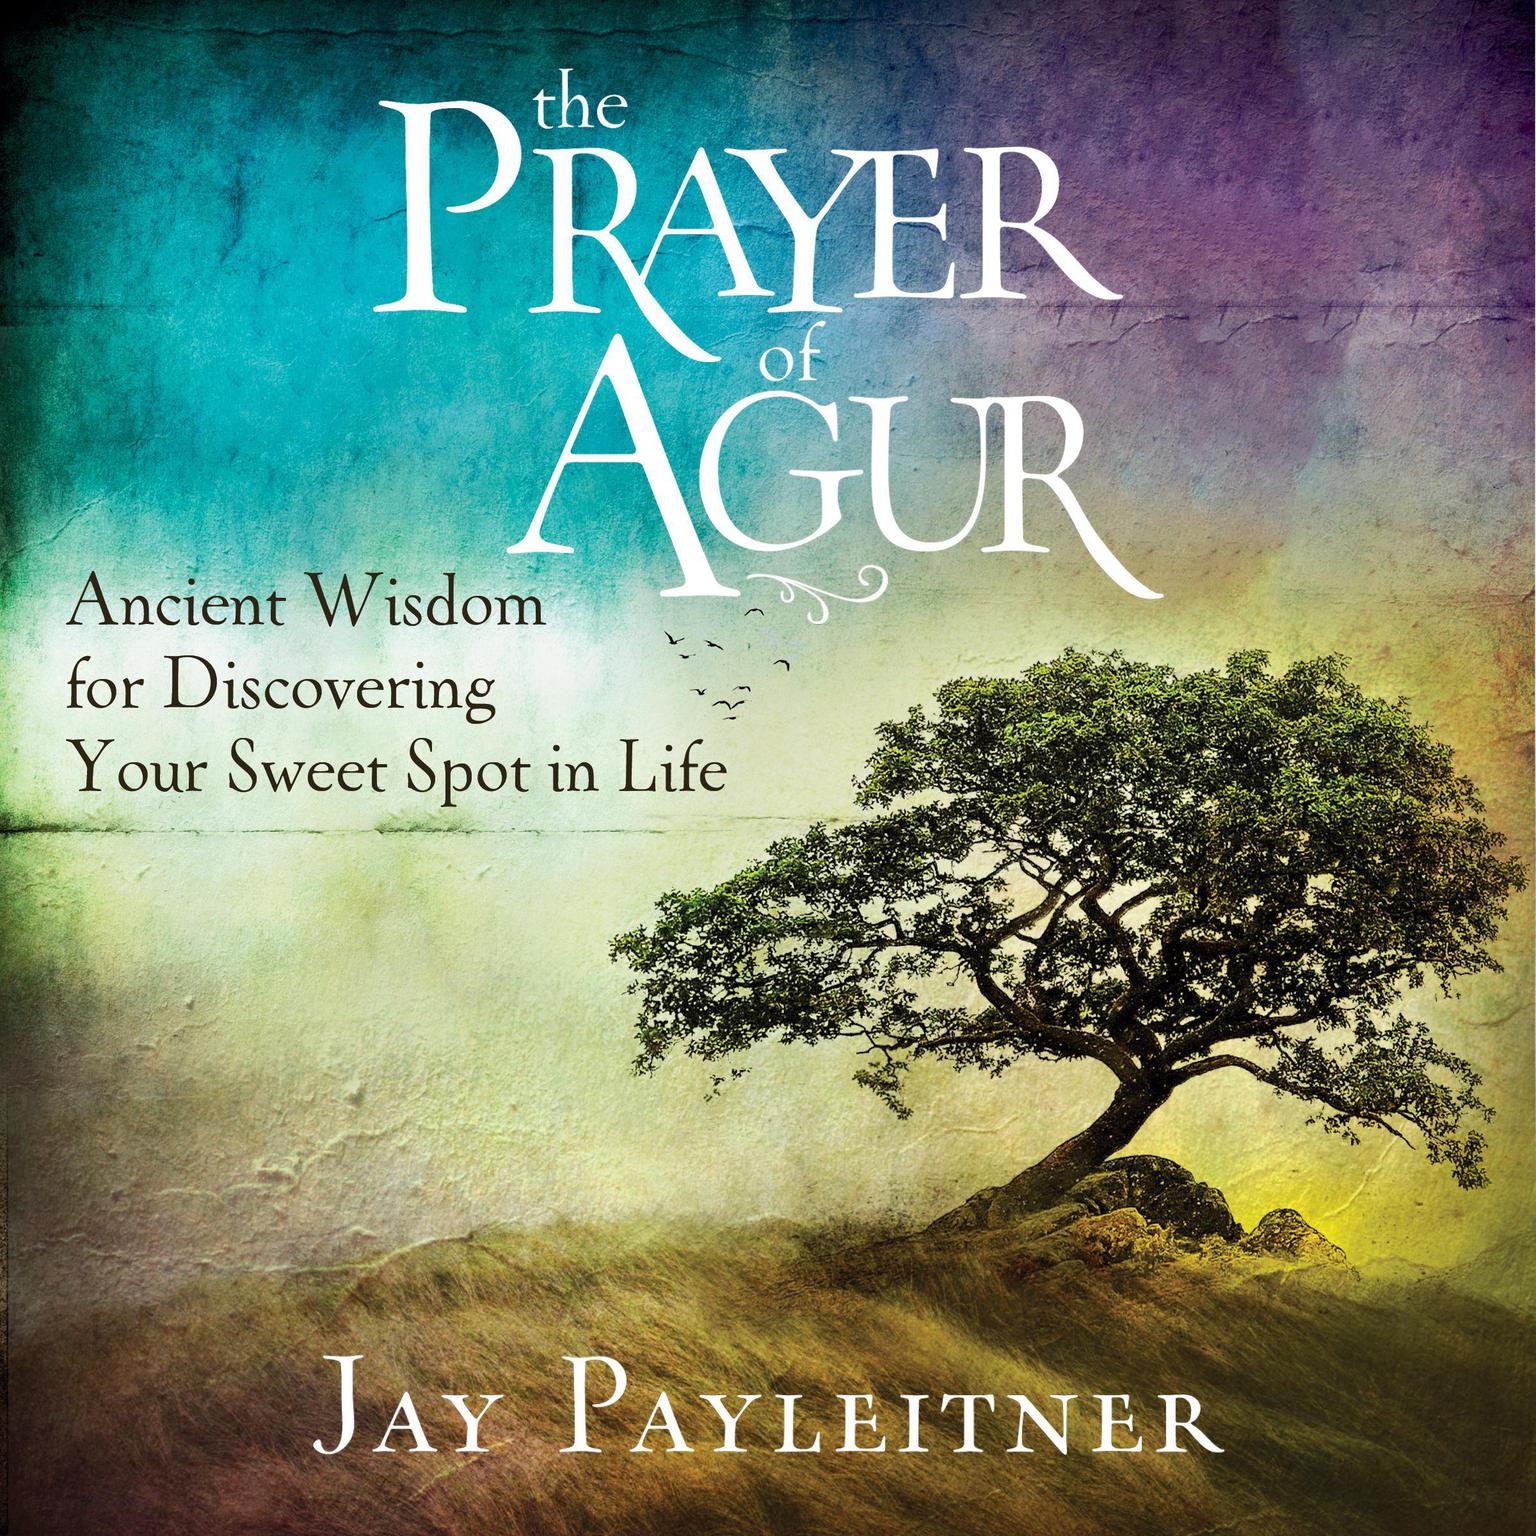 The Prayer of Agur: Ancient Wisdom for Discovering Your Sweet Spot in Life Audiobook, by Jay Payleitner